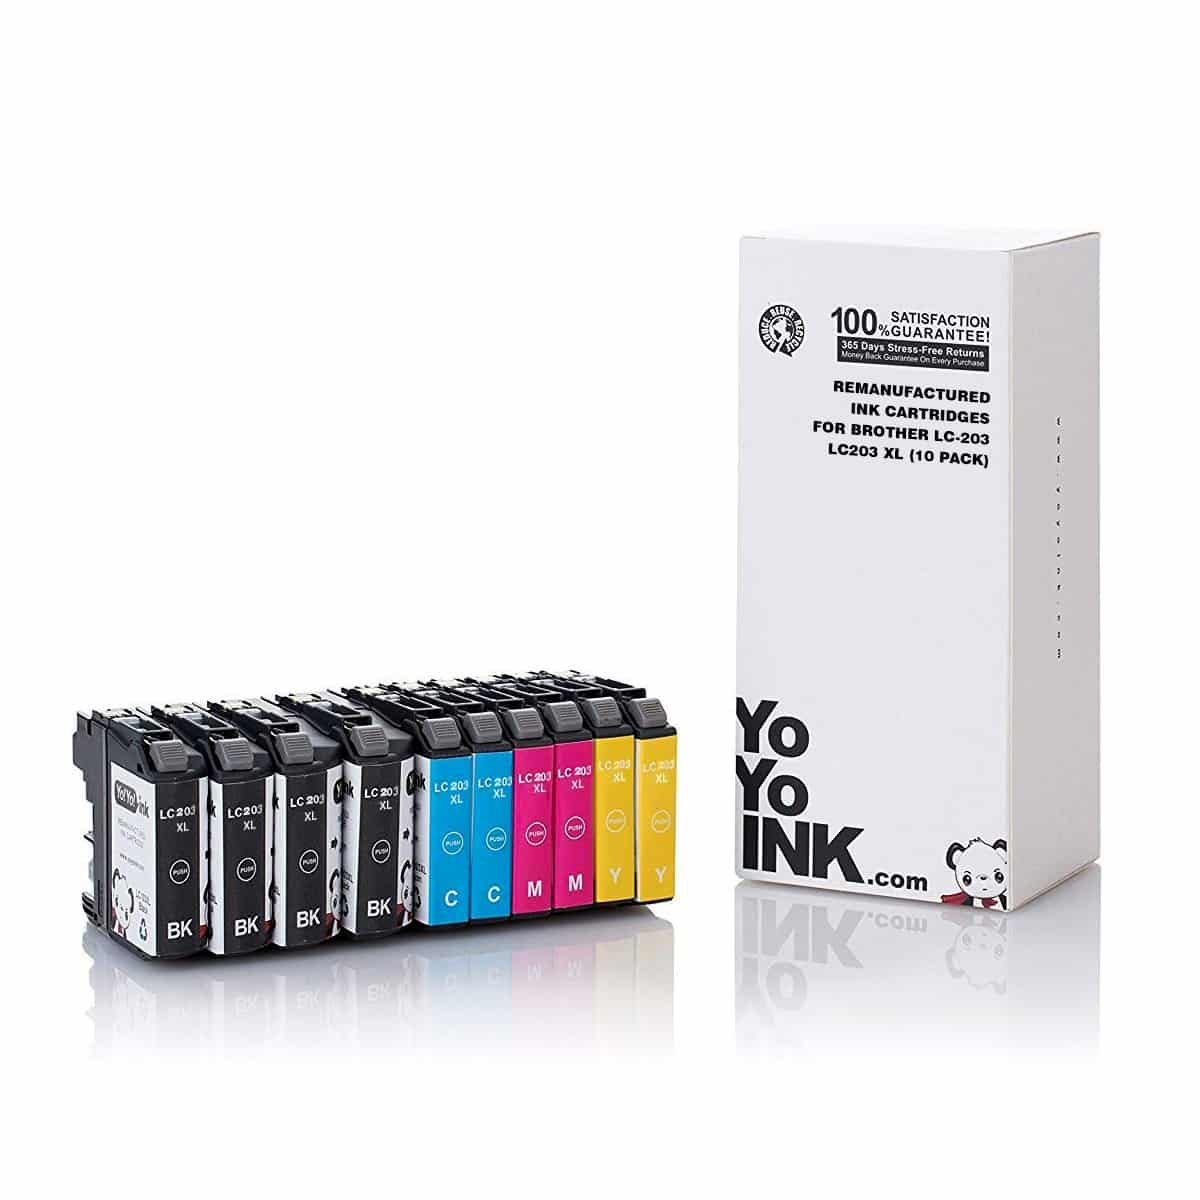 Brother LC203 XL Ink Cartridge, Compatible High Yield -10-Pack (4 Black, 2 Cyan, 2 Magenta, 2 Yellow